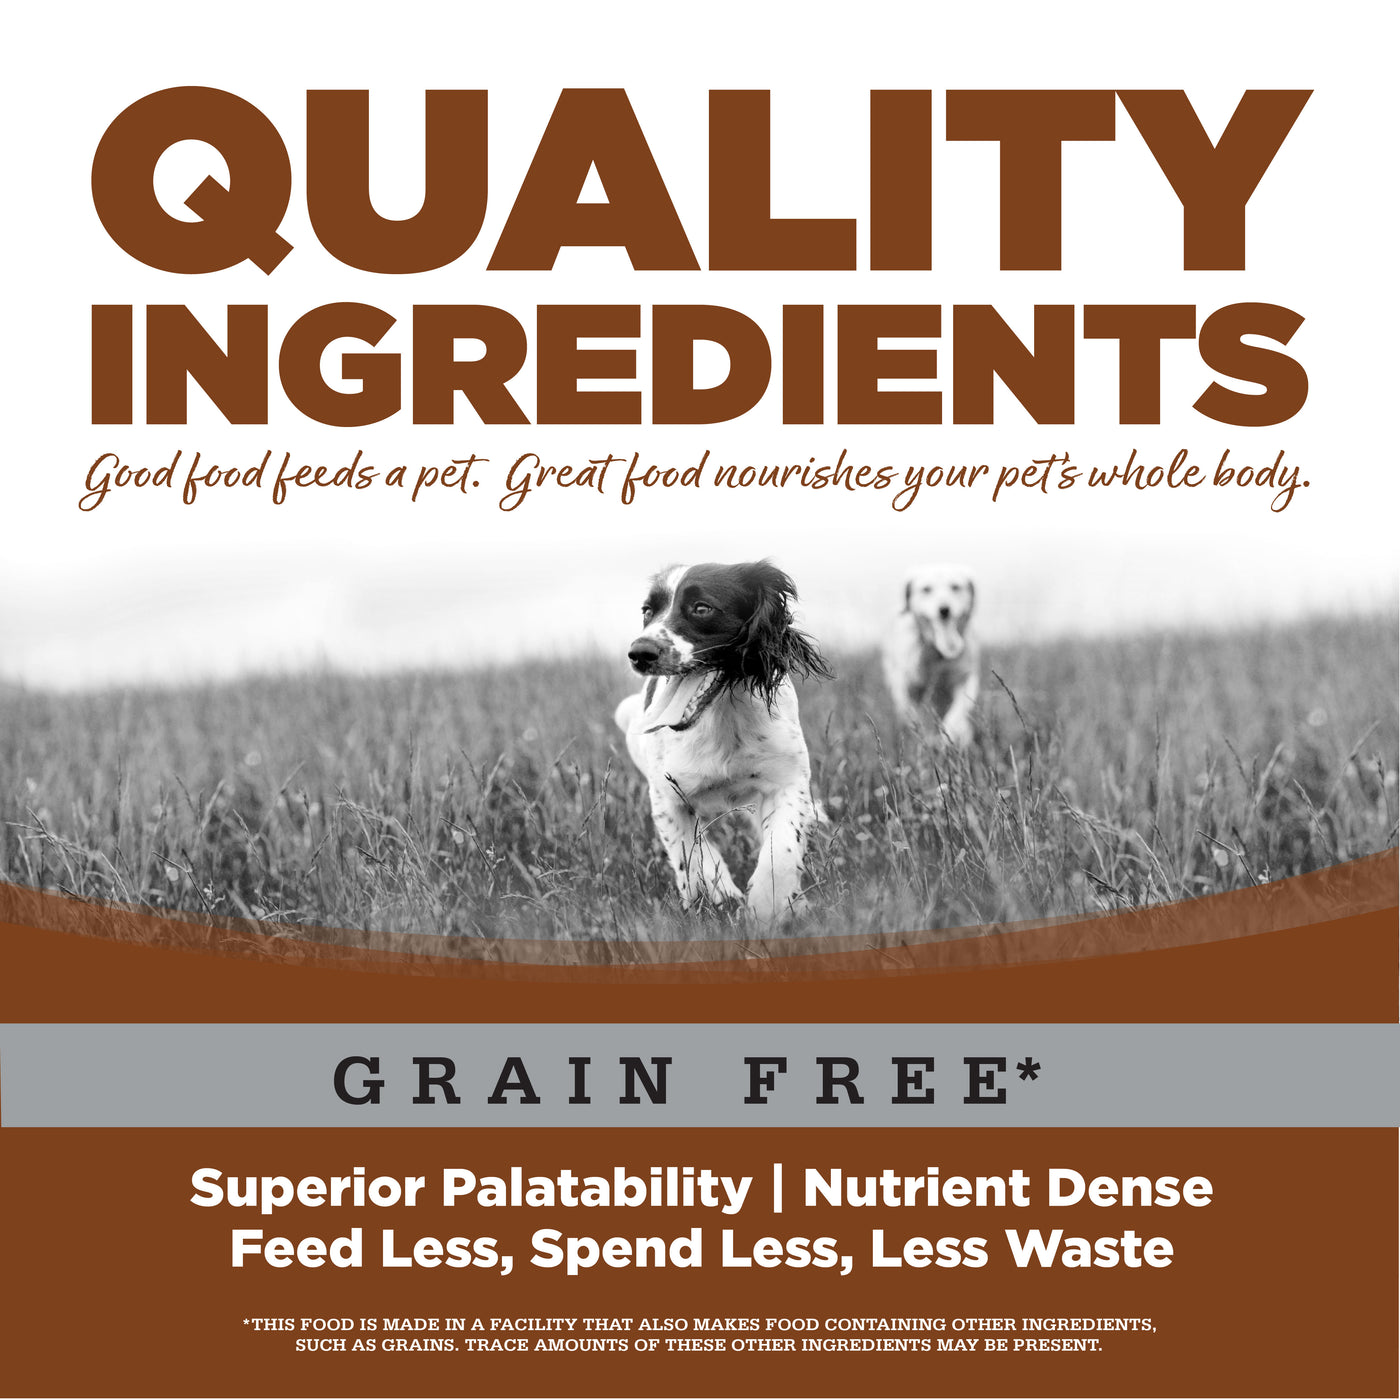 NutriSource - Large Breed Lamb Meal & Peas Recipe Dry Dog Food